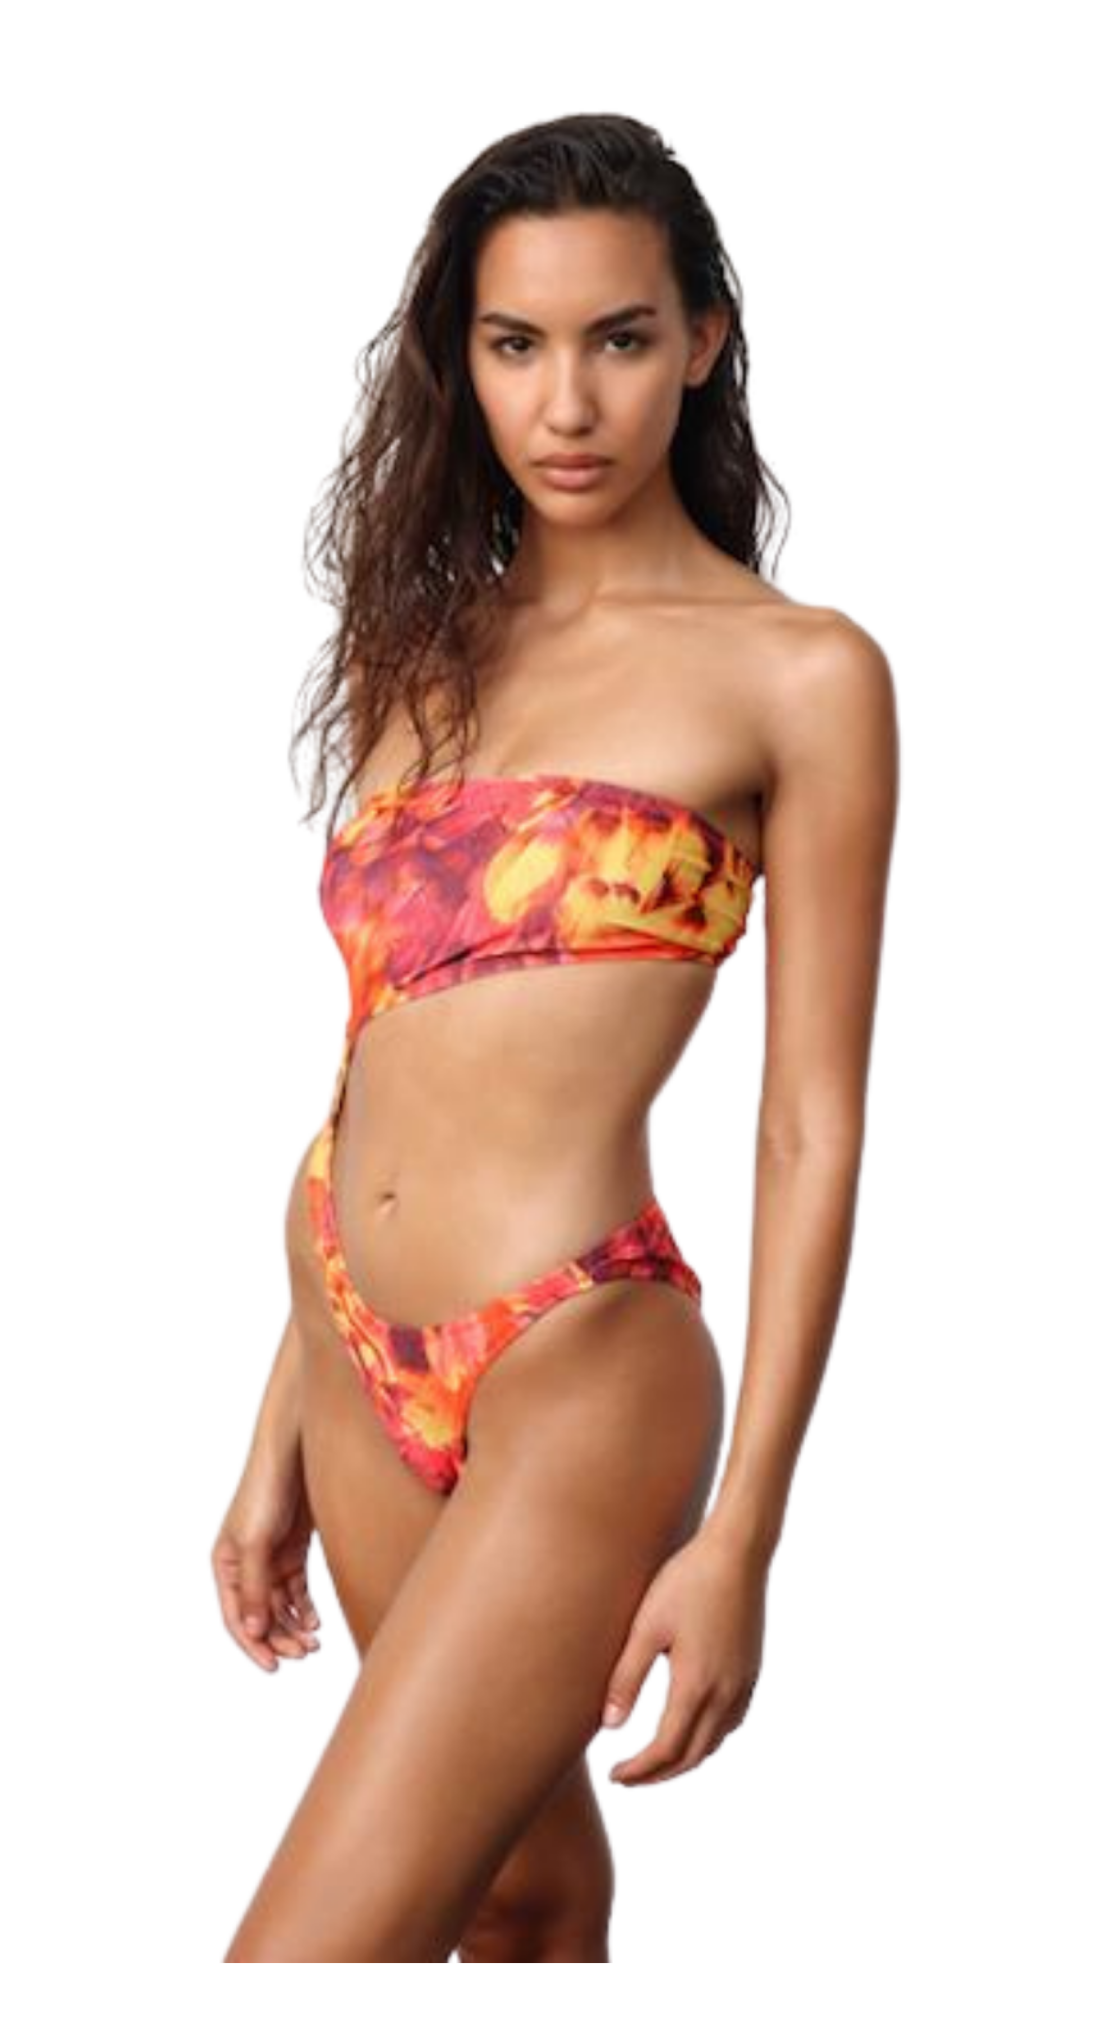 This Thing's Everywhere: Melissa Simone's Sultry, '90s-Inspired Swimwear -  Fashionista